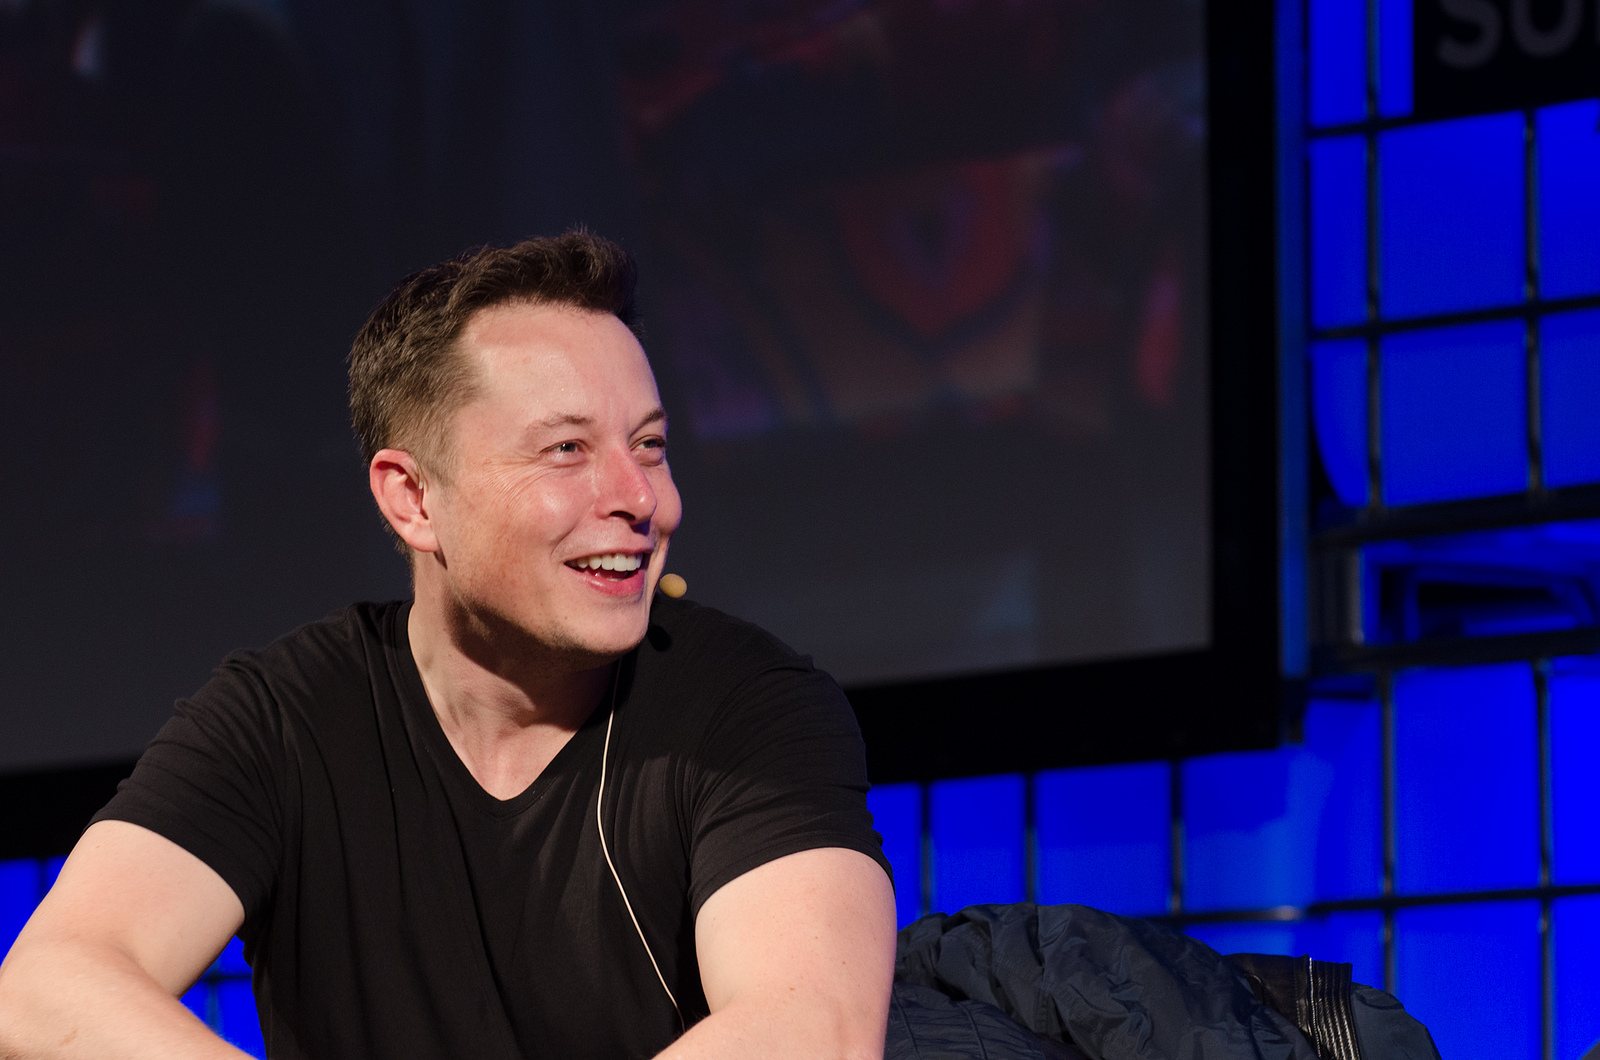 The 3 Things Elon Musk Knows About School That All Students Should Copy